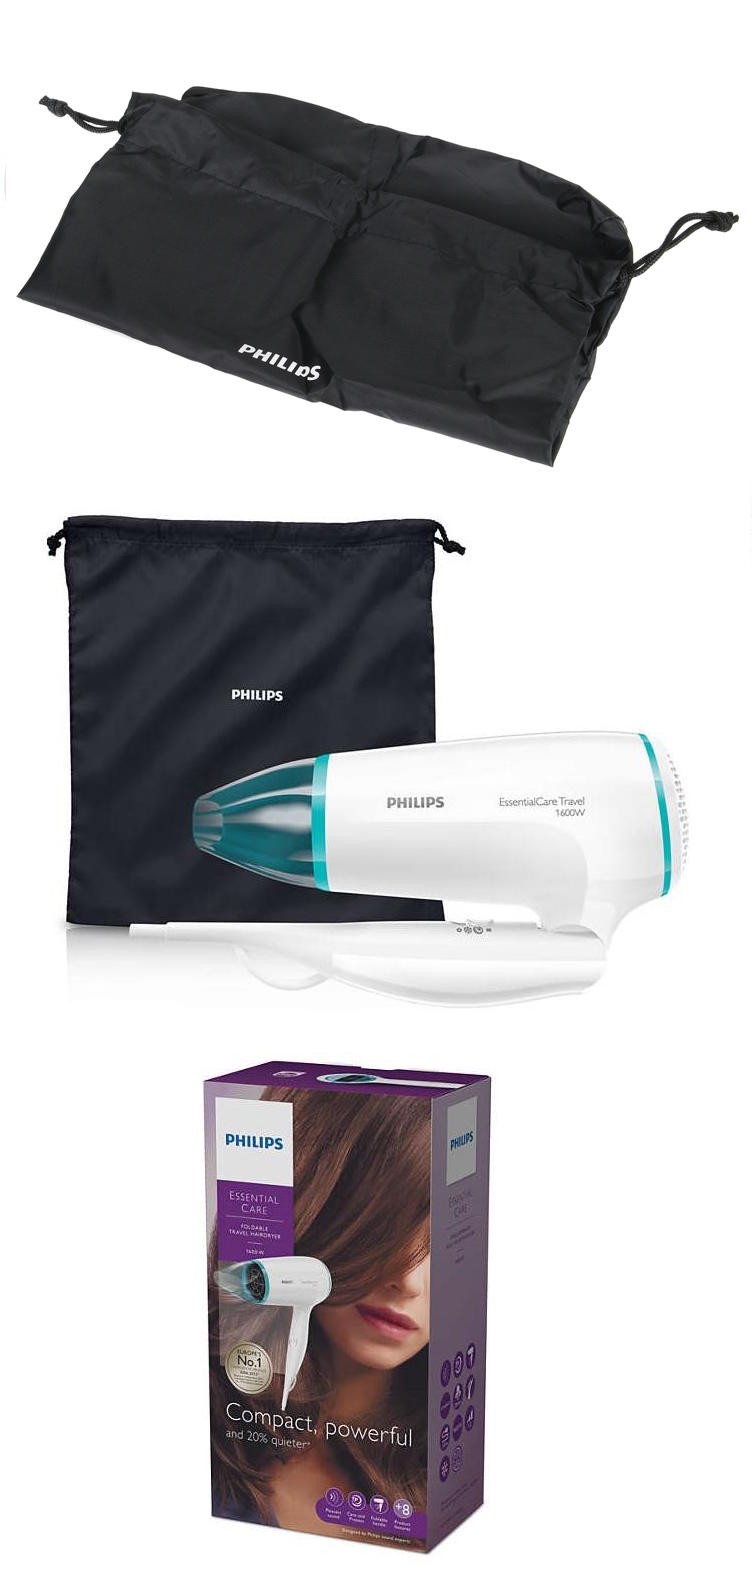 Philips 1600w Compact Powerful And 20% Quieter Hairdryer